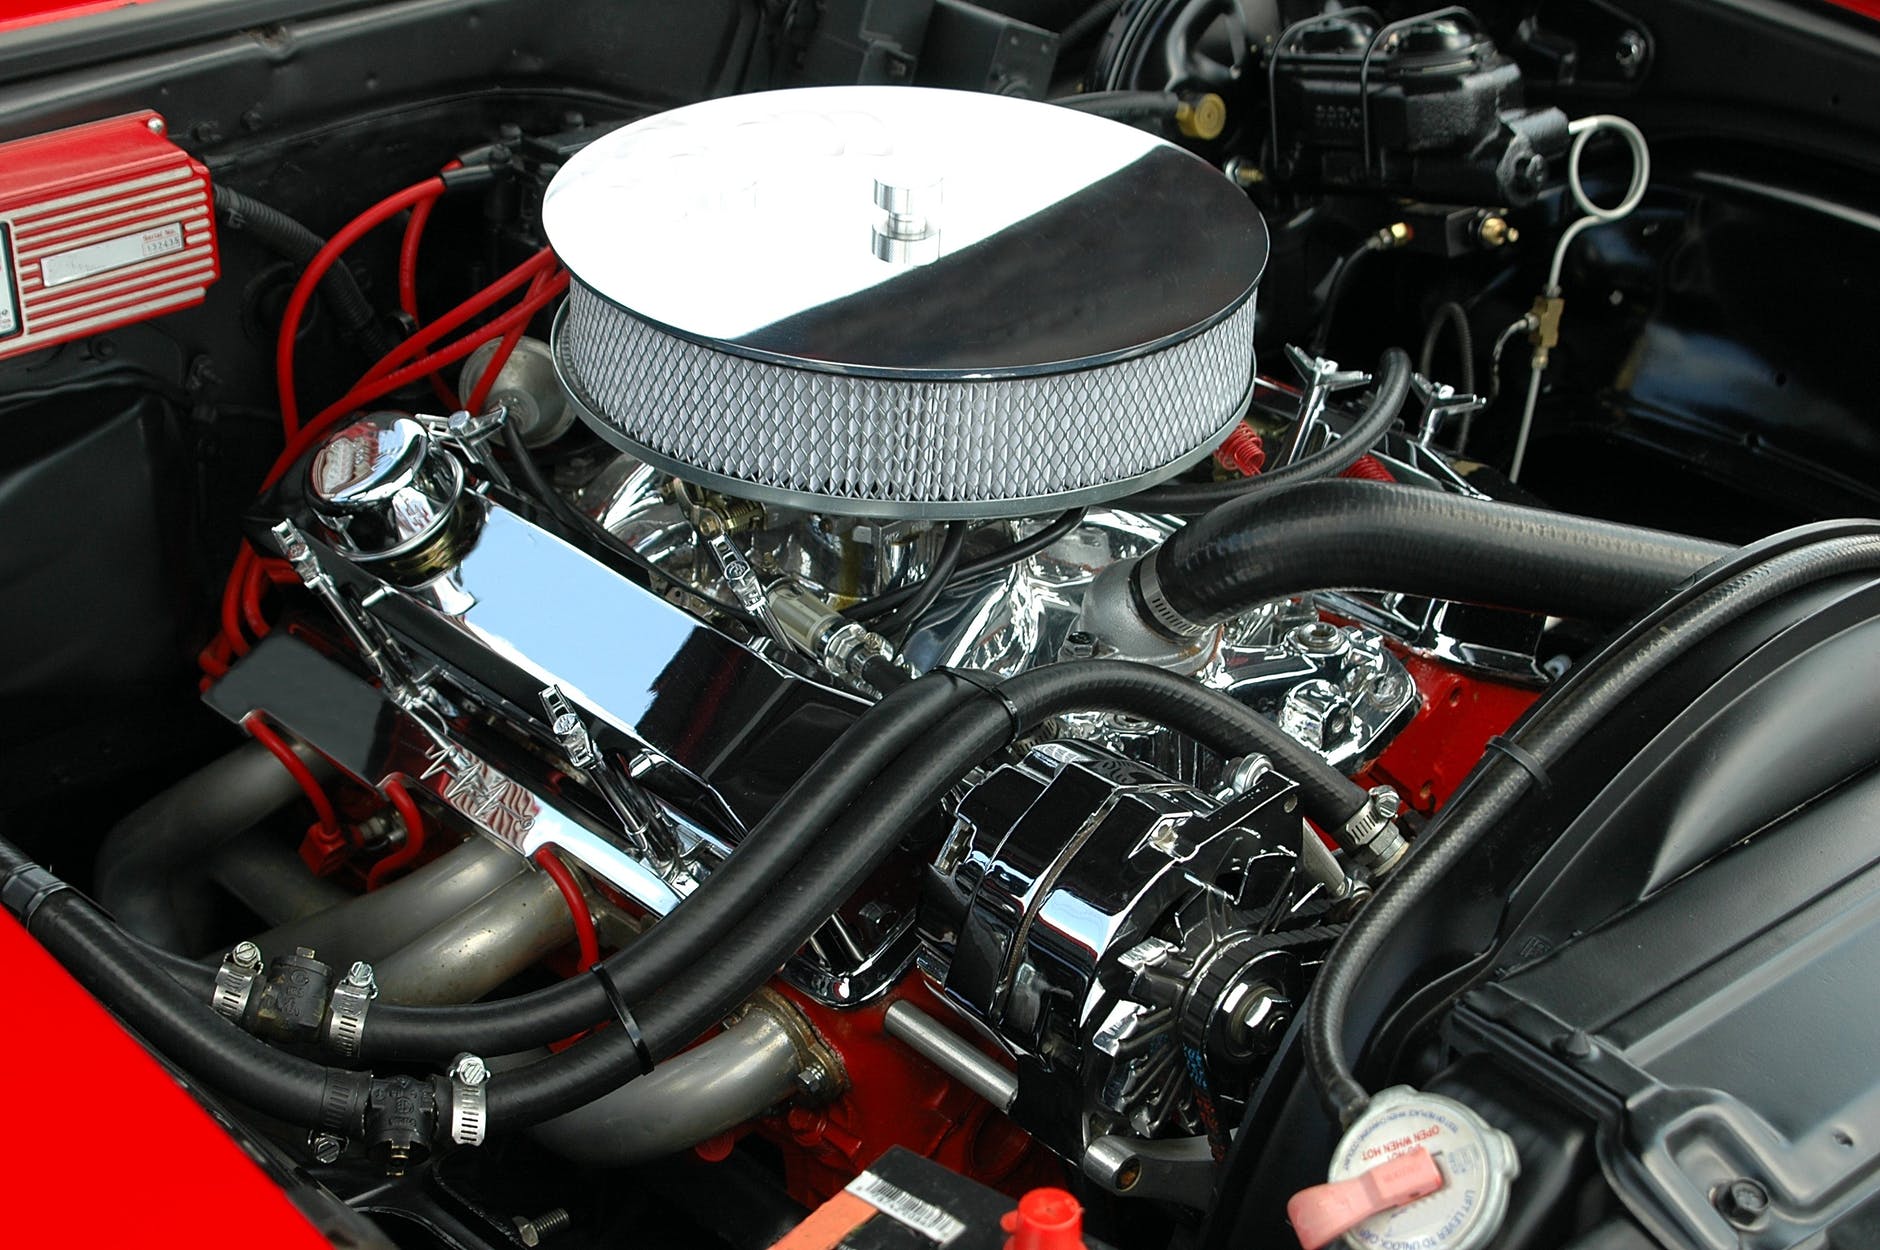 5 Things you should keep in mind when buying a used engine